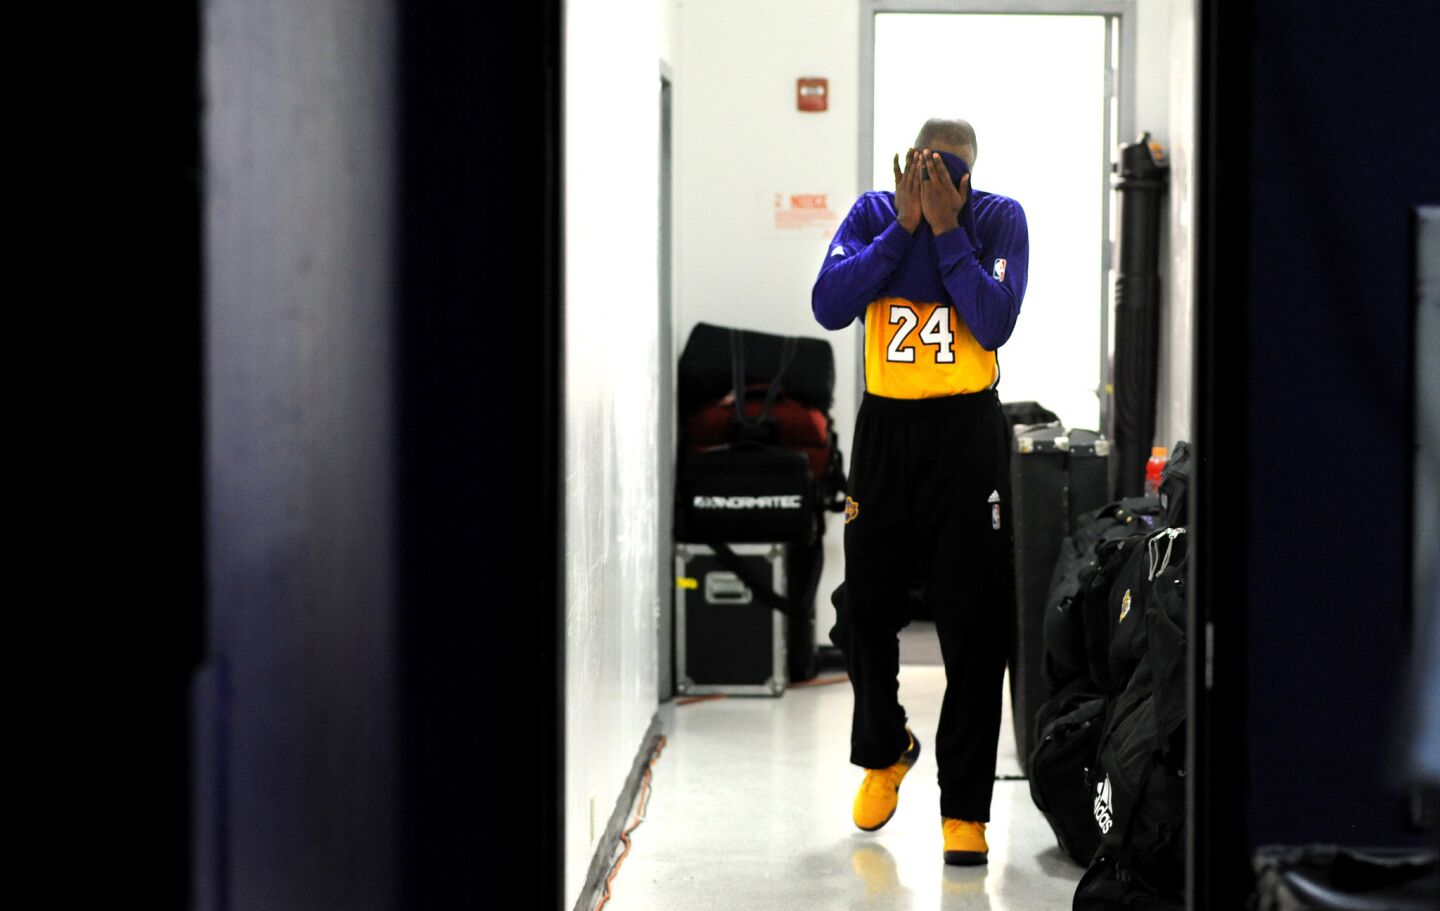 Kobe Bryant wipes his face as he leaves the Sleep Train Arena locker room at halftime during a Lakers game against the Kings in Sacramento on Jan. 7, 2016.